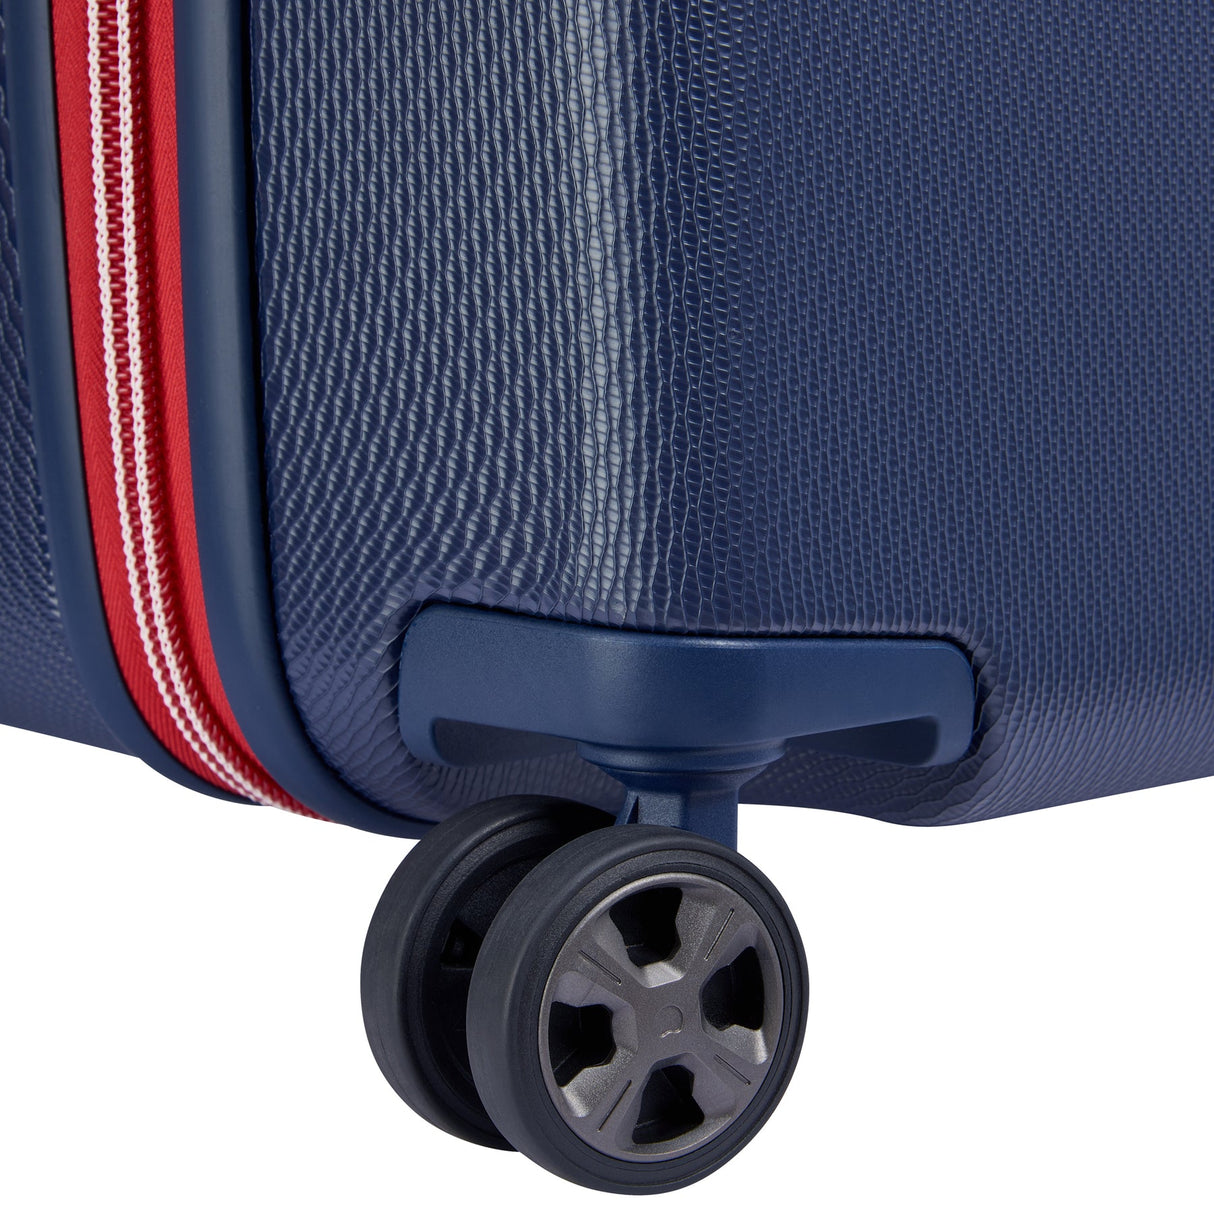 Delsey Chatelet Air 2.0 Carry-On Spinner , , delsey-chatelet-air-2.0-40167680502-13_1800x1800_e1952e77-4cf8-4578-b3b4-e25034782319